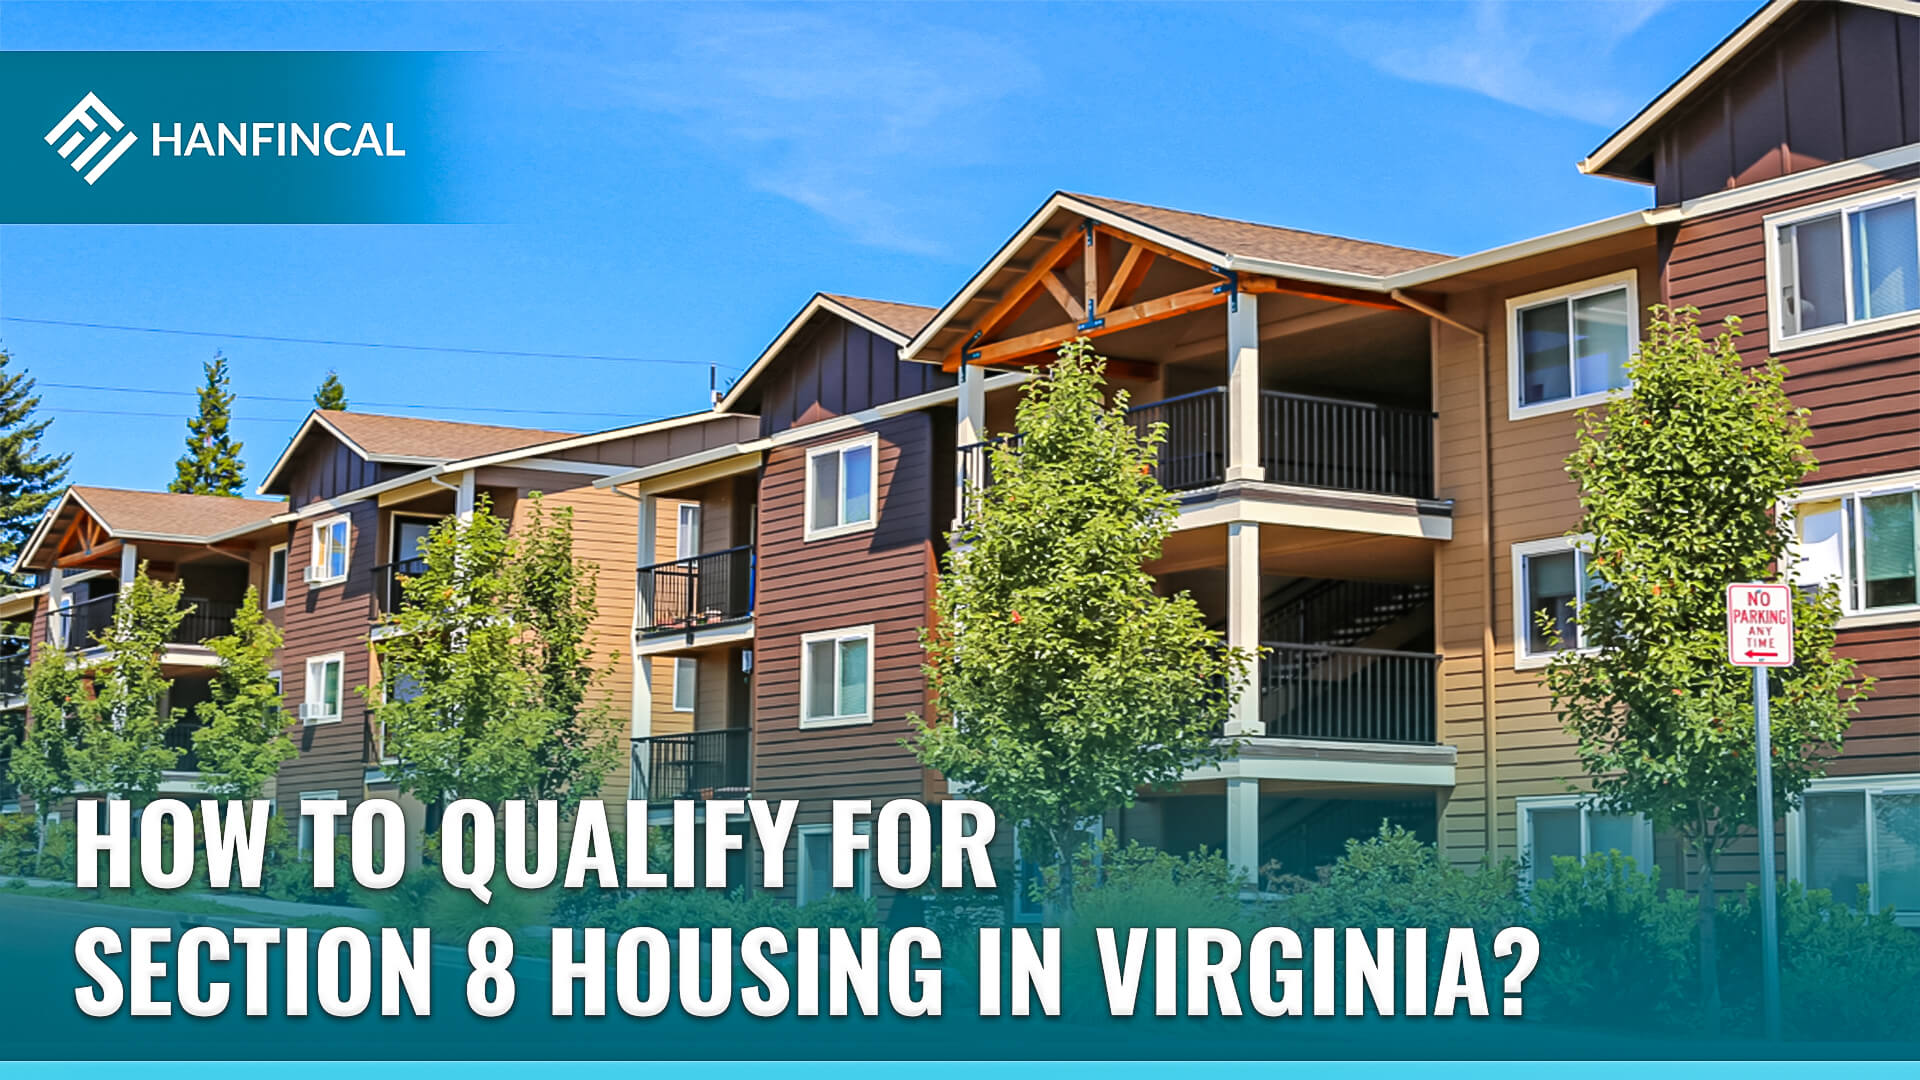 How to qualify for Section 8 Housing in Virginia (VA)?